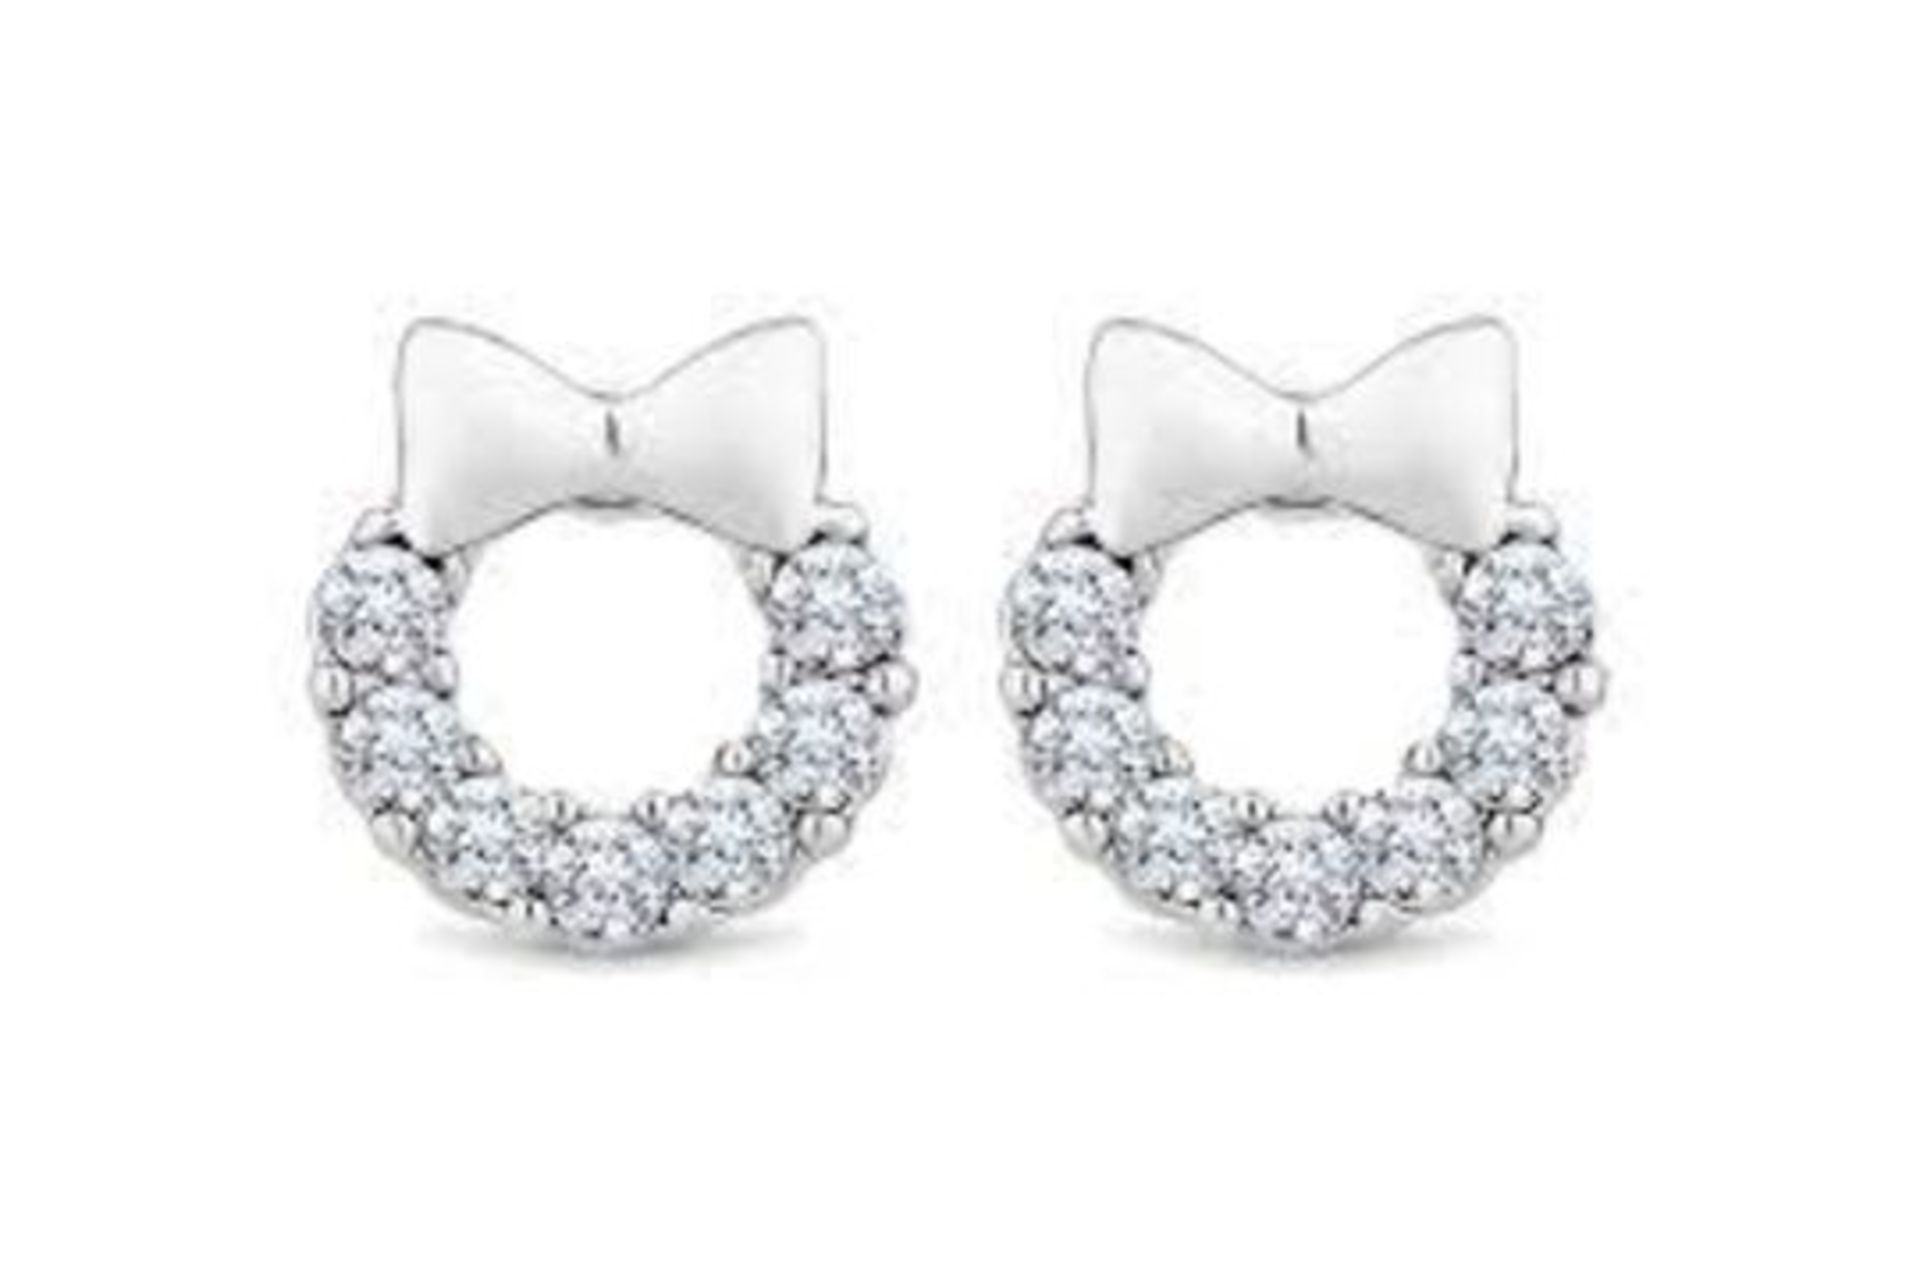 TRADE LOT 45 X BRAND NEW DIAMONDSTYLE LONDON WREATH STUD EARRINGS WITH CERTIFICATION OF AUTHENTICITY